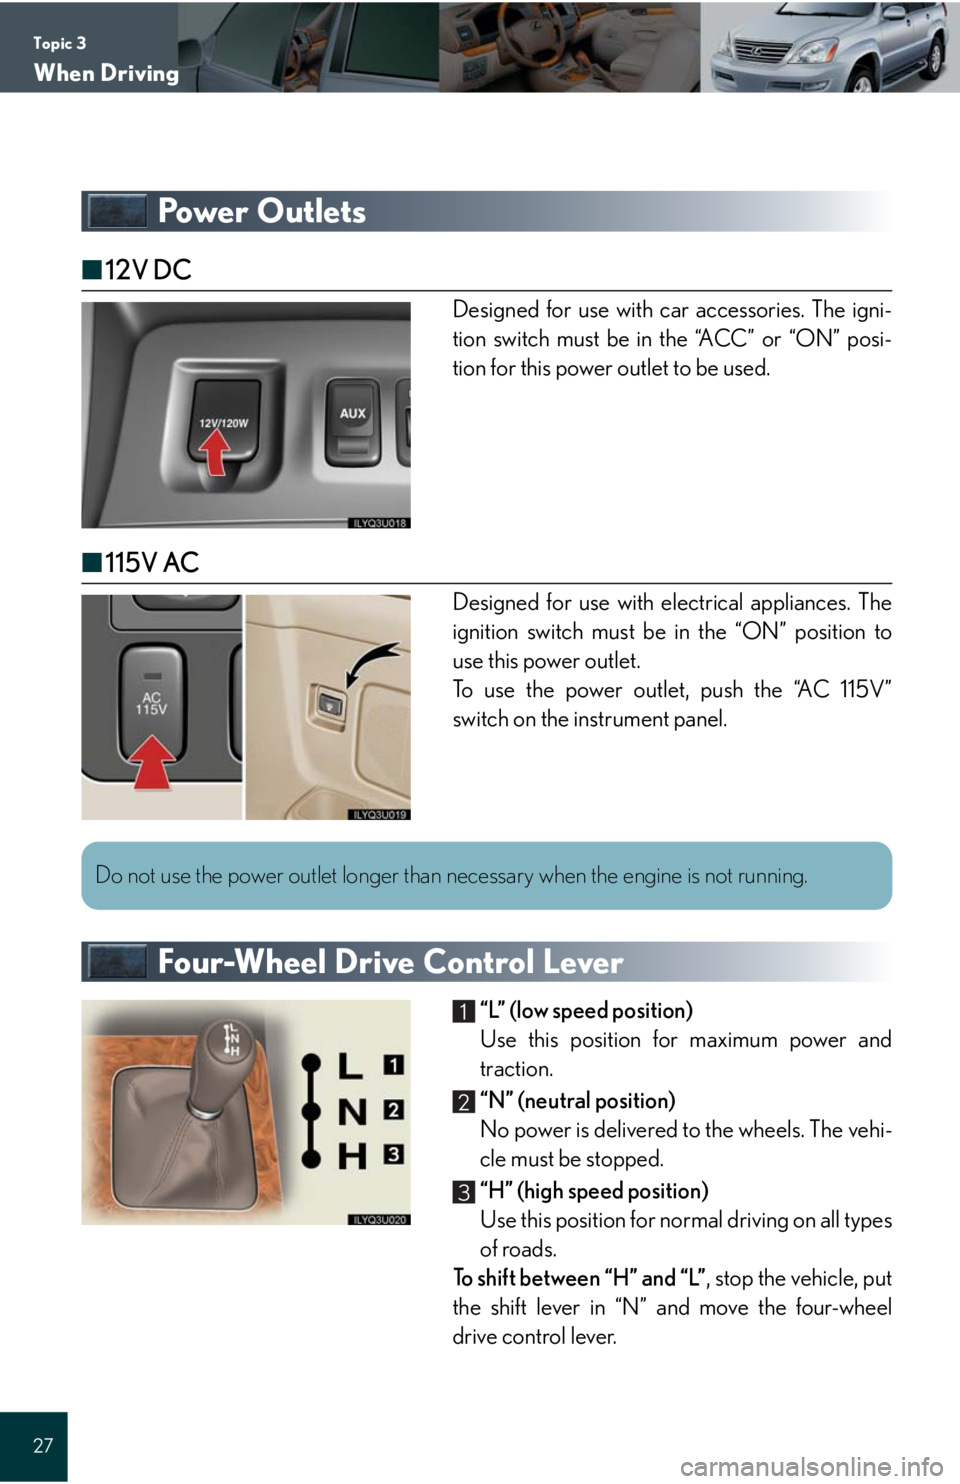 Lexus GX470 2008  Refueling / LEXUS 2008 GX470 QUICK GUIDE OWNERS MANUAL (OM60D81U) Topic 3
When Driving
27
Powe r  O u t l e t s
■12V DC
Designed for use with car accessories. The igni-
tion switch must be in the “ACC” or “ON” posi-
tion for this power outlet to be used.
�